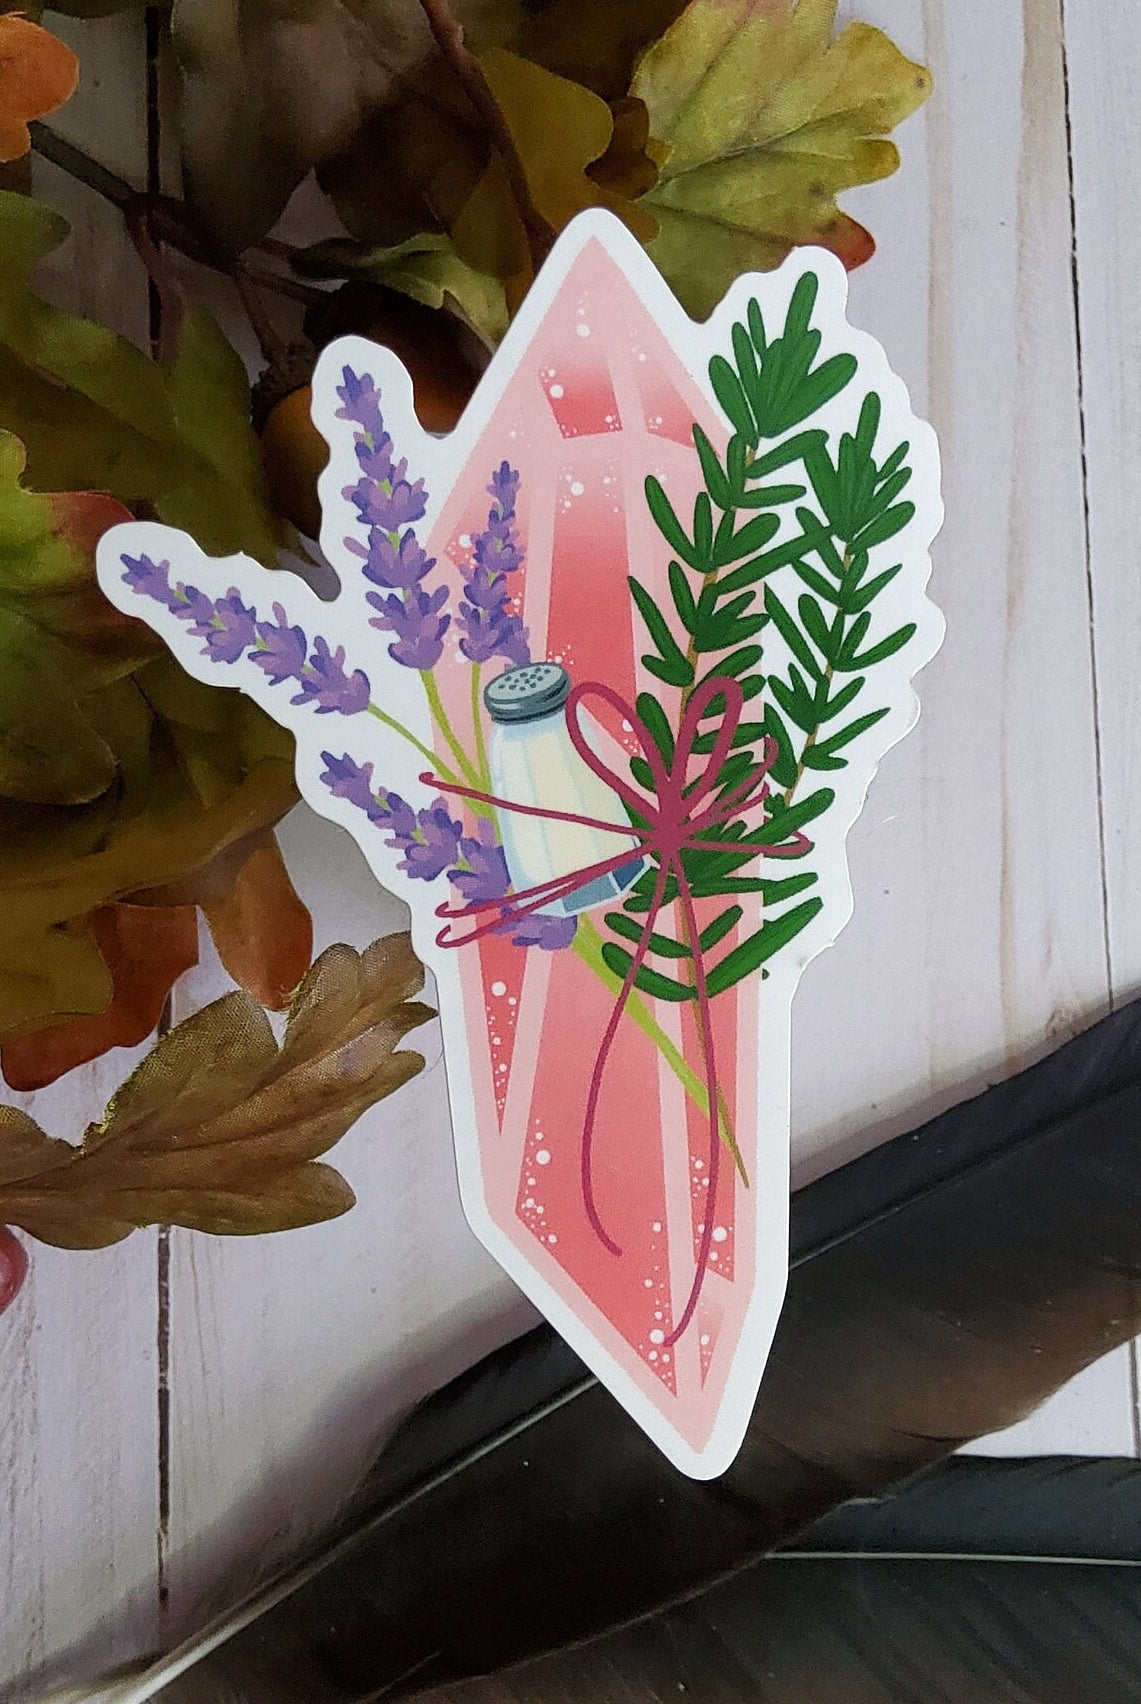 GLOSSY STICKER: Rosemary and Lavender Crystal Magic , Pink Aesthetic Crystal Sticker , Crystal Sticker , Magic Crystal Sticker , Crystals